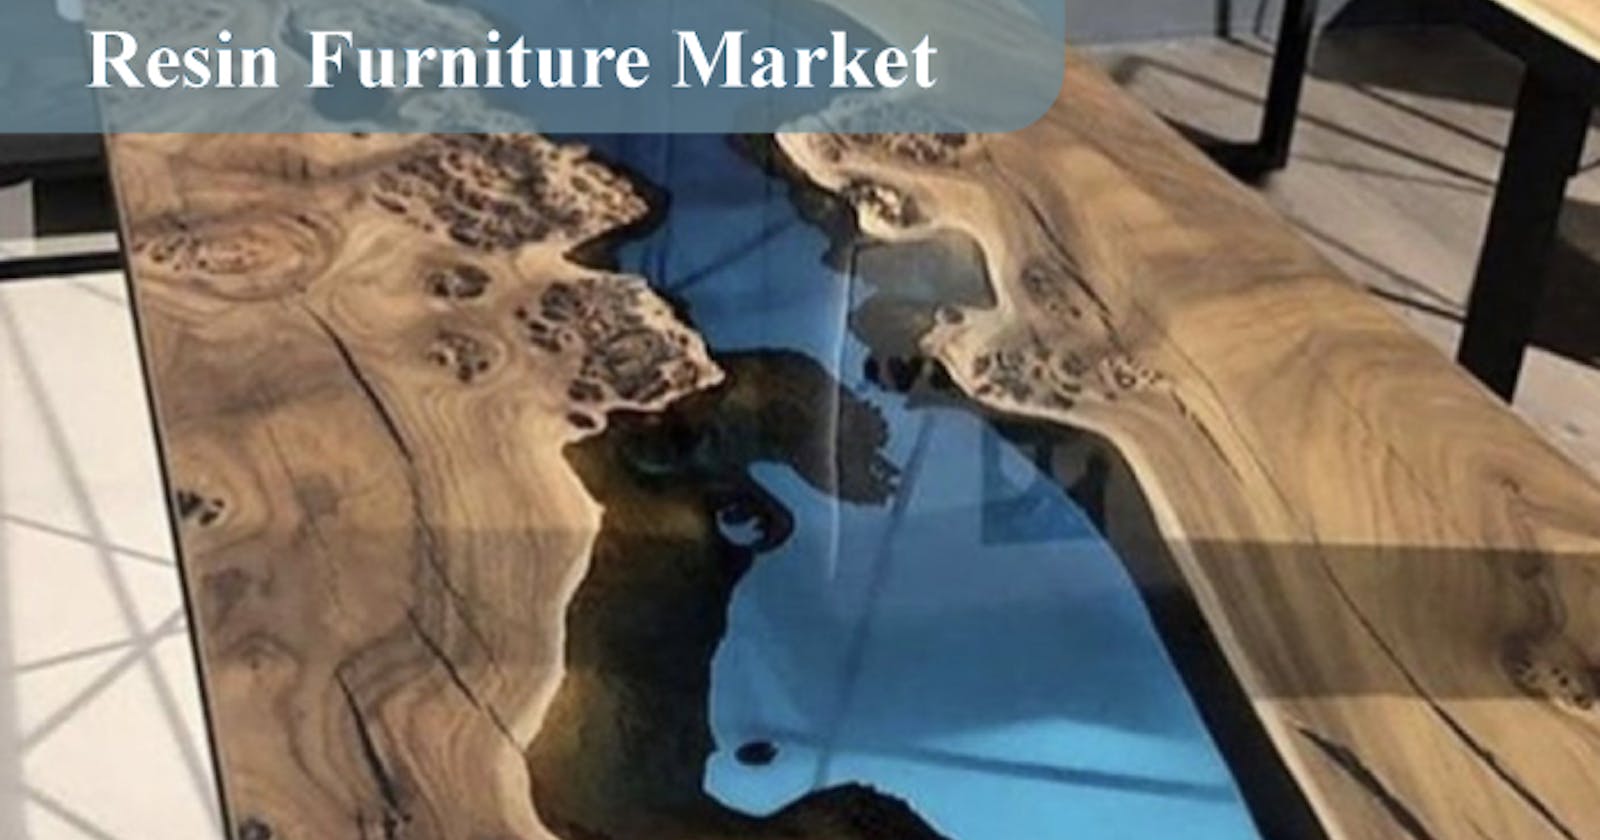 Global Resin Furniture Market Poised for Remarkable Growth, Expected to Exceed US$25 Billion by 2030